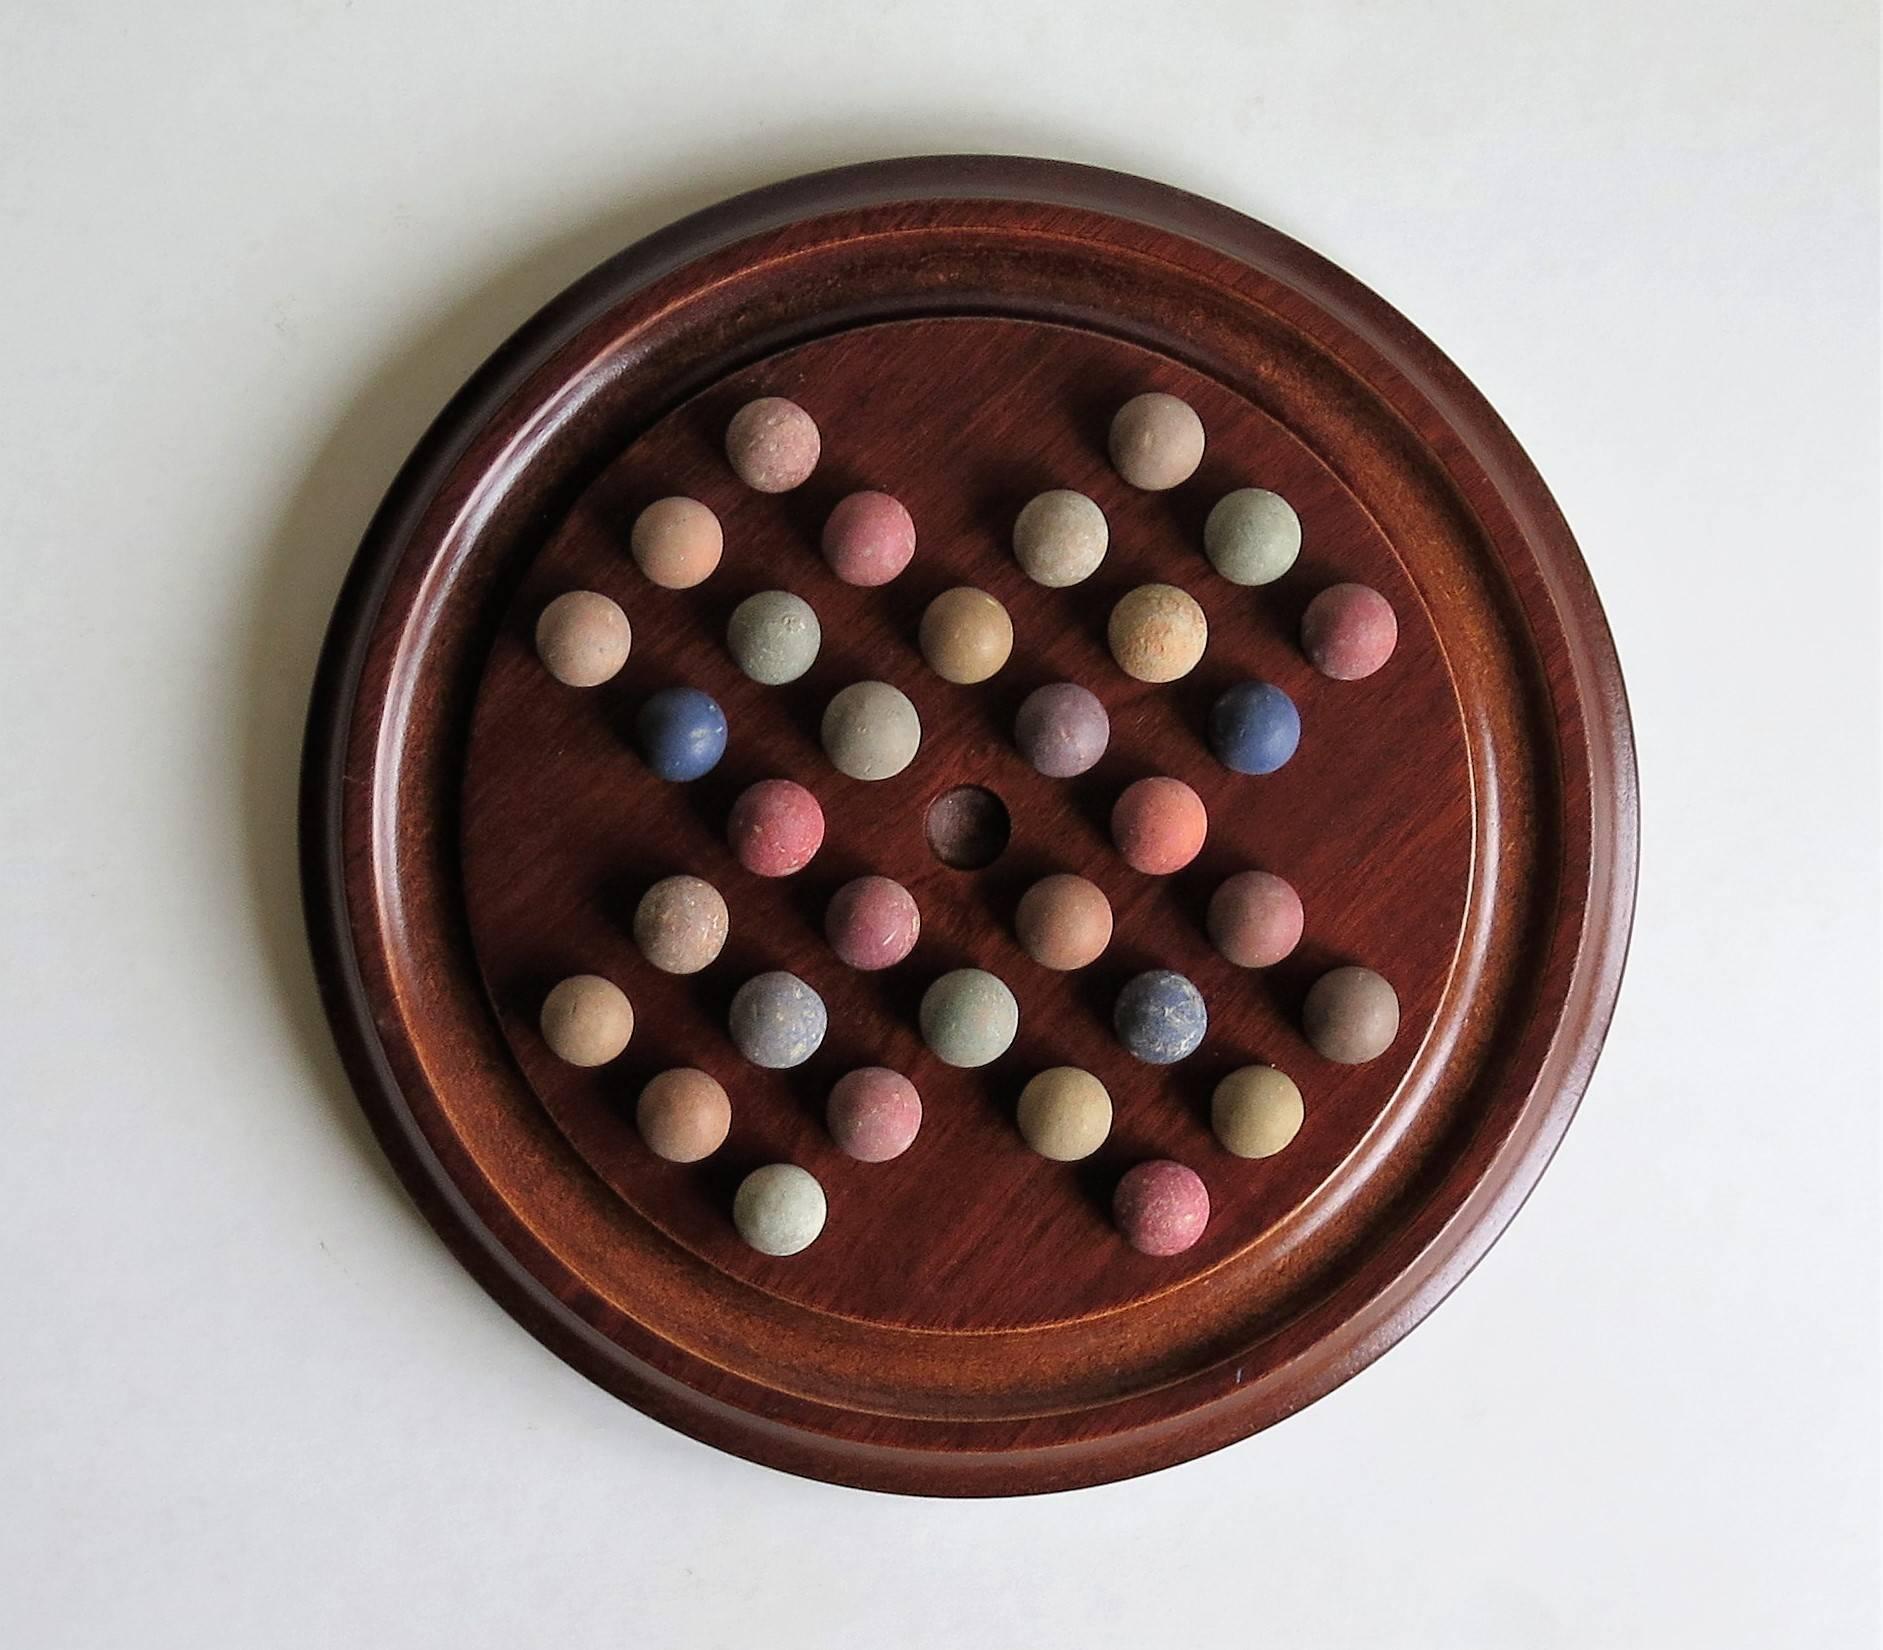 This is a table sized game of marble solitaire, having a very good board and a complete set of early marbles. 

The circular turned board is made of mahogany and has an excellent grain and color. The board has 32 equi-spaced holes with an additional